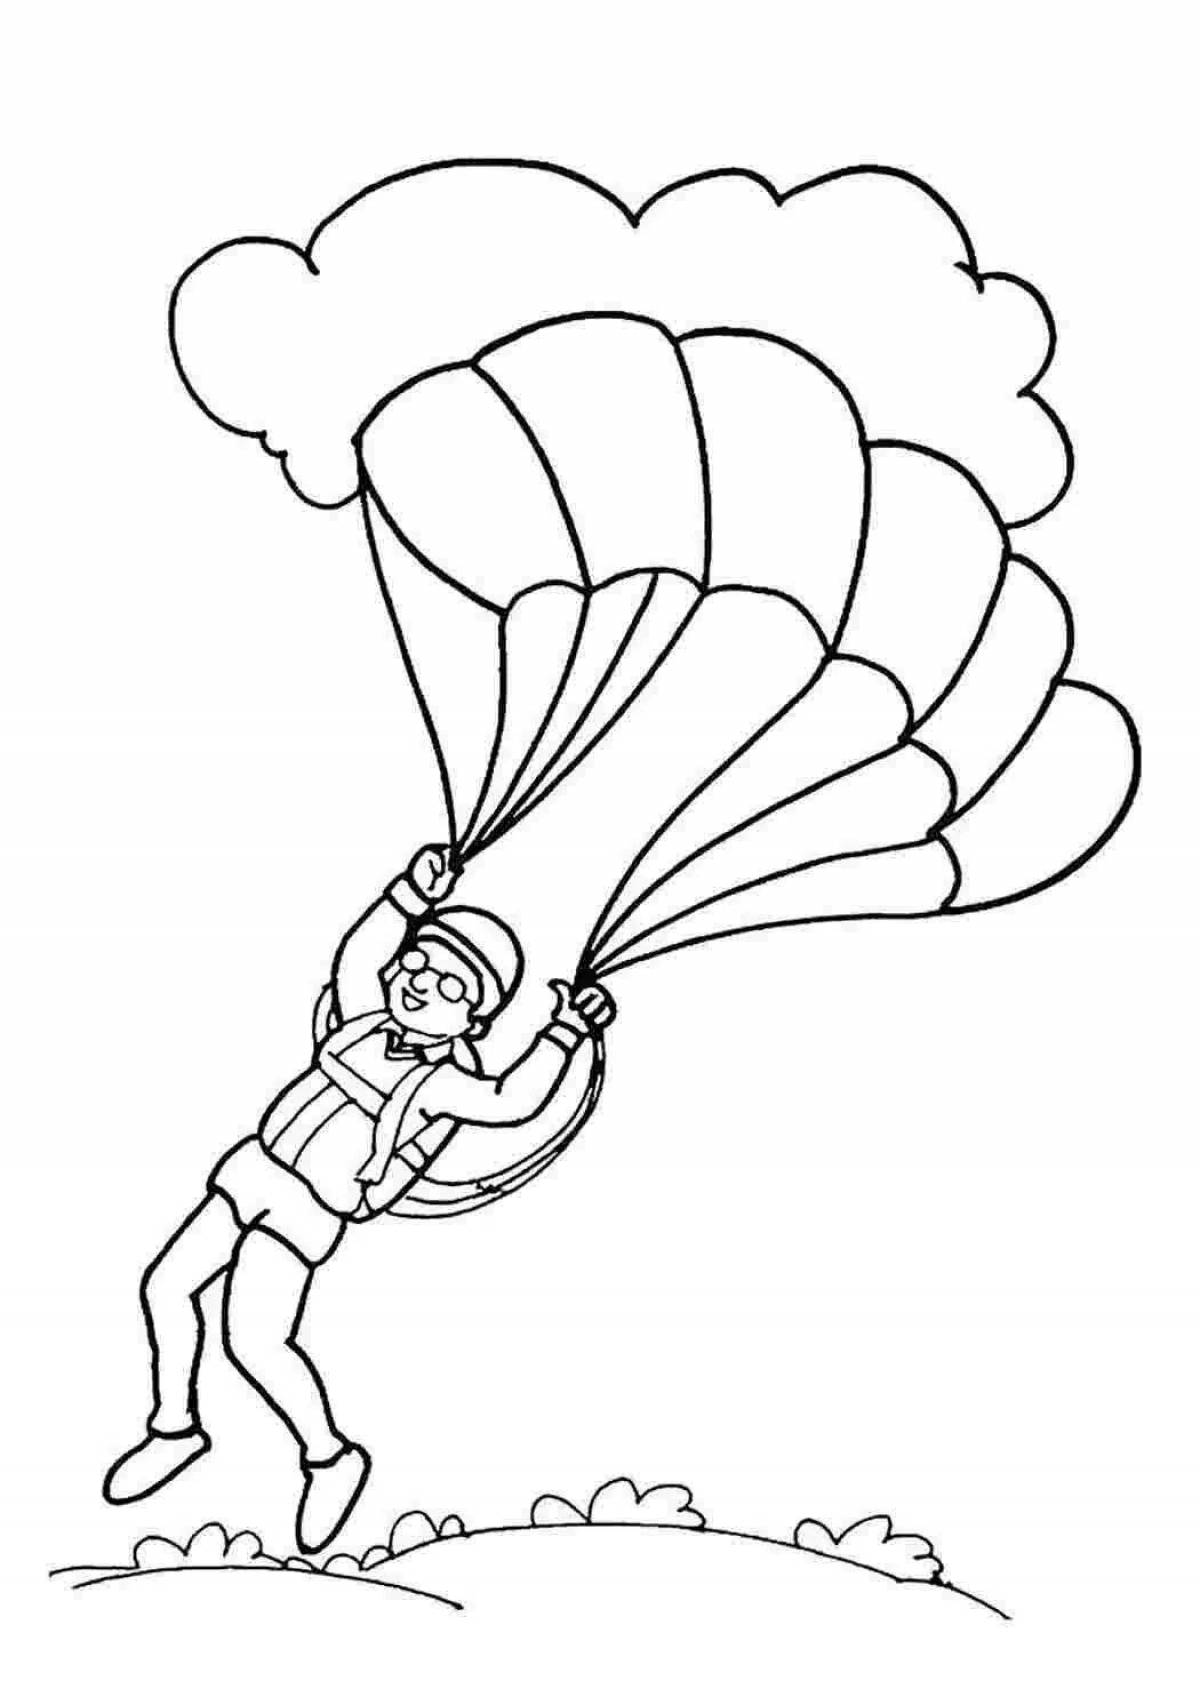 Innovative military parachutist coloring for kids